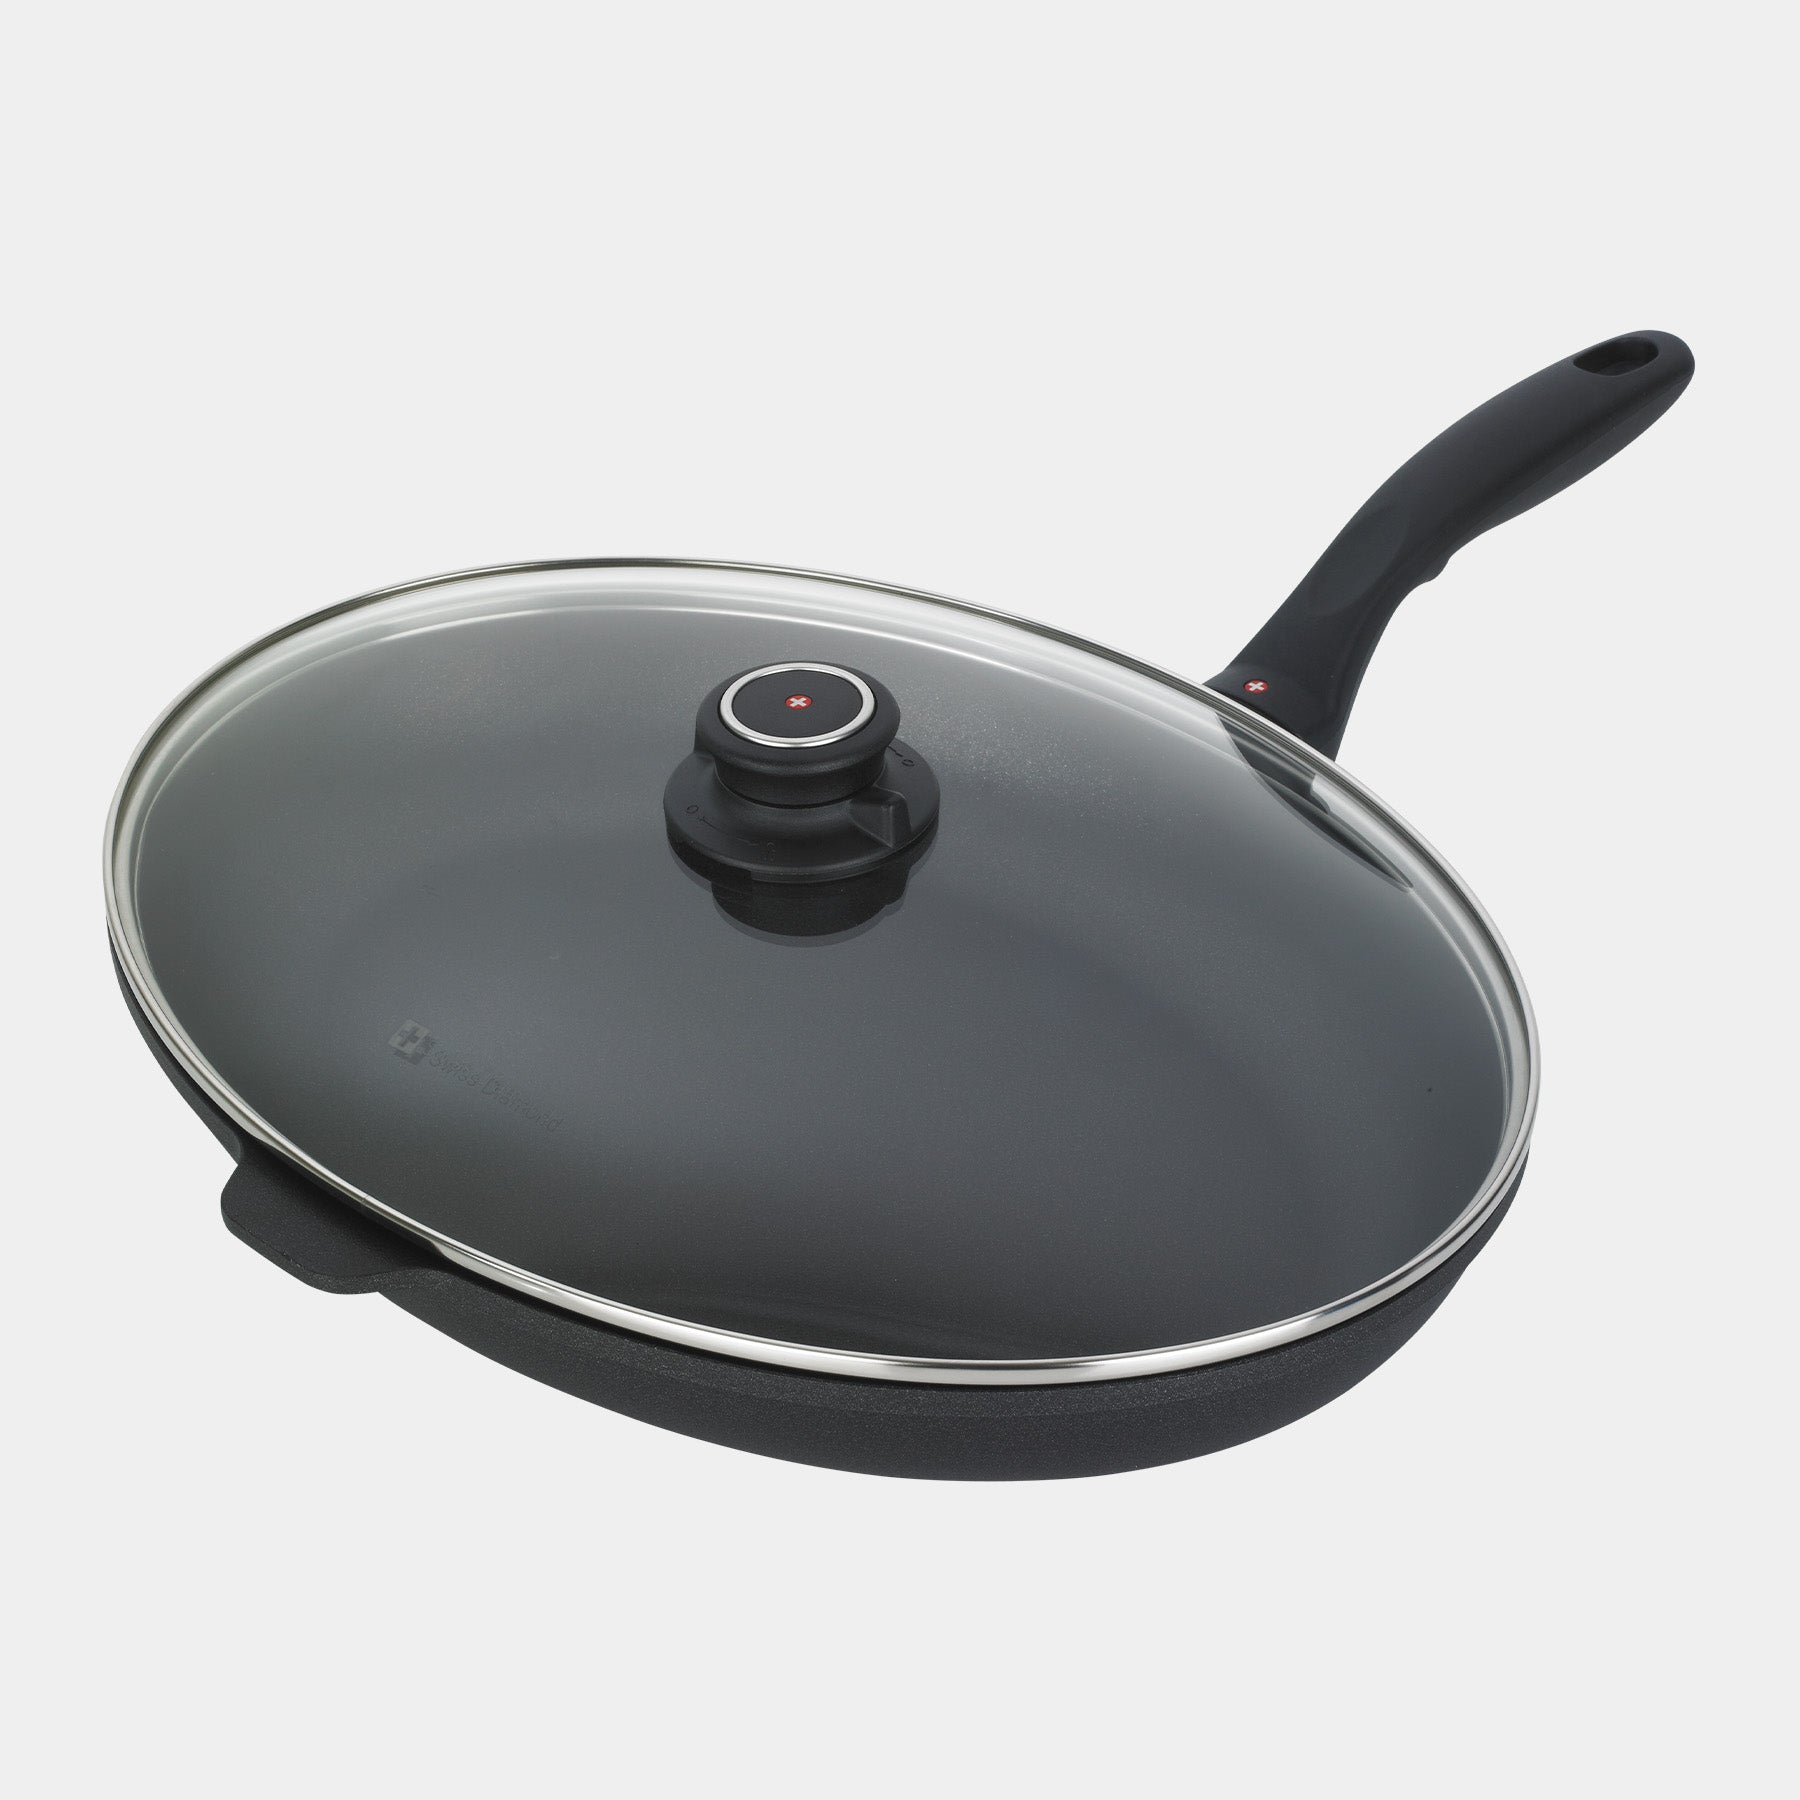 XD Nonstick Oval Fish Pan with Glass Lid top view